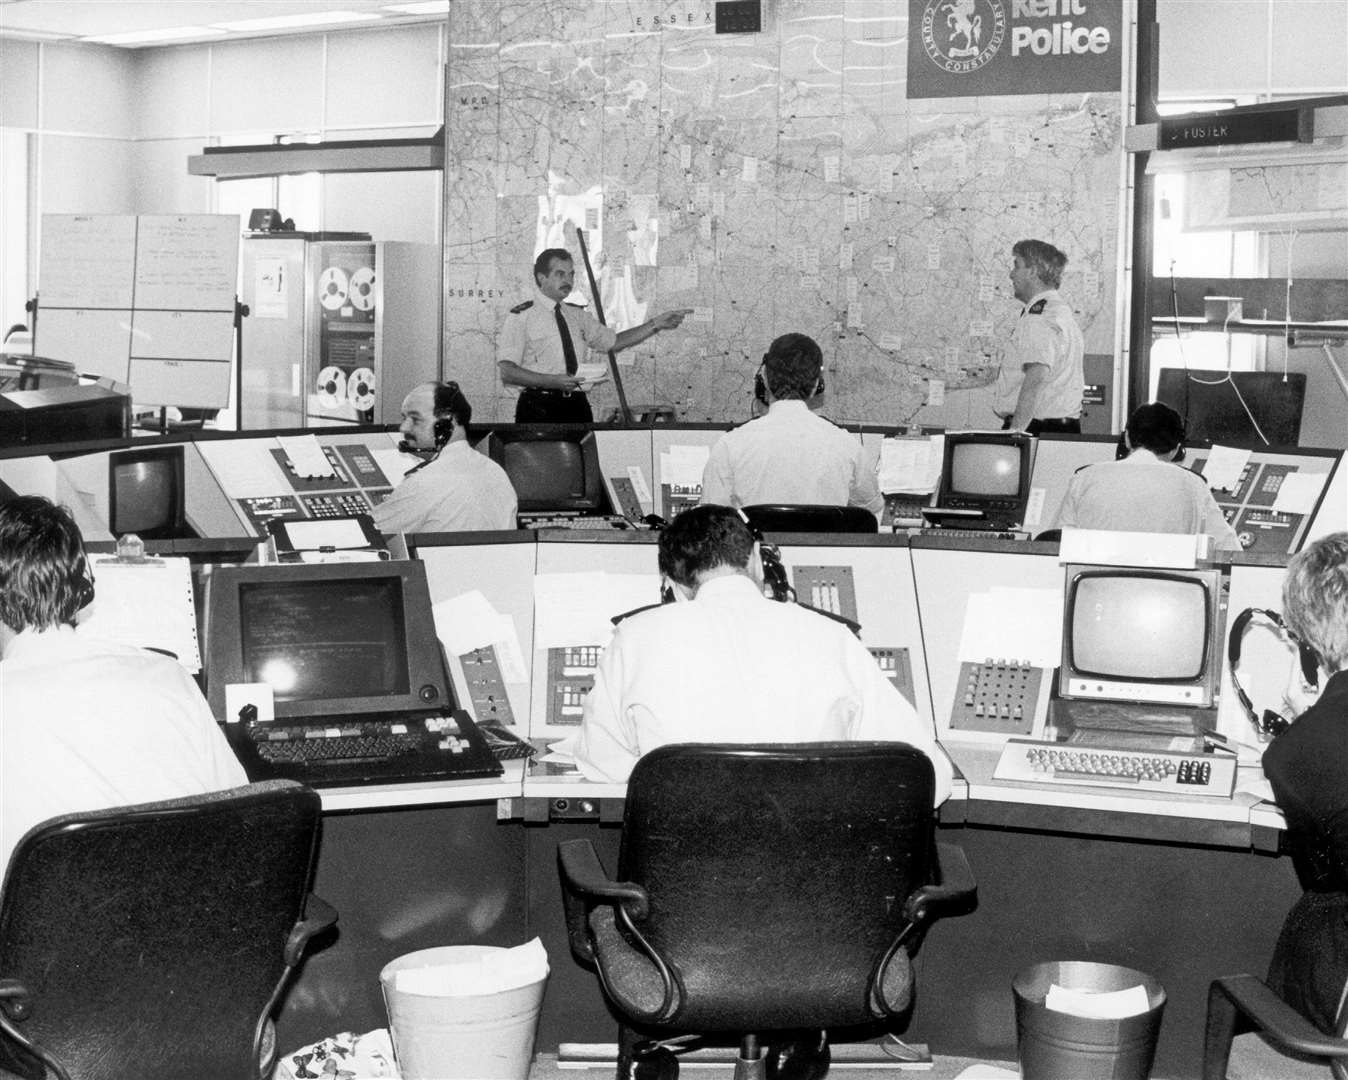 A look inside in Kent Police headquarters in Sutton Road, Maidstone, in 1987